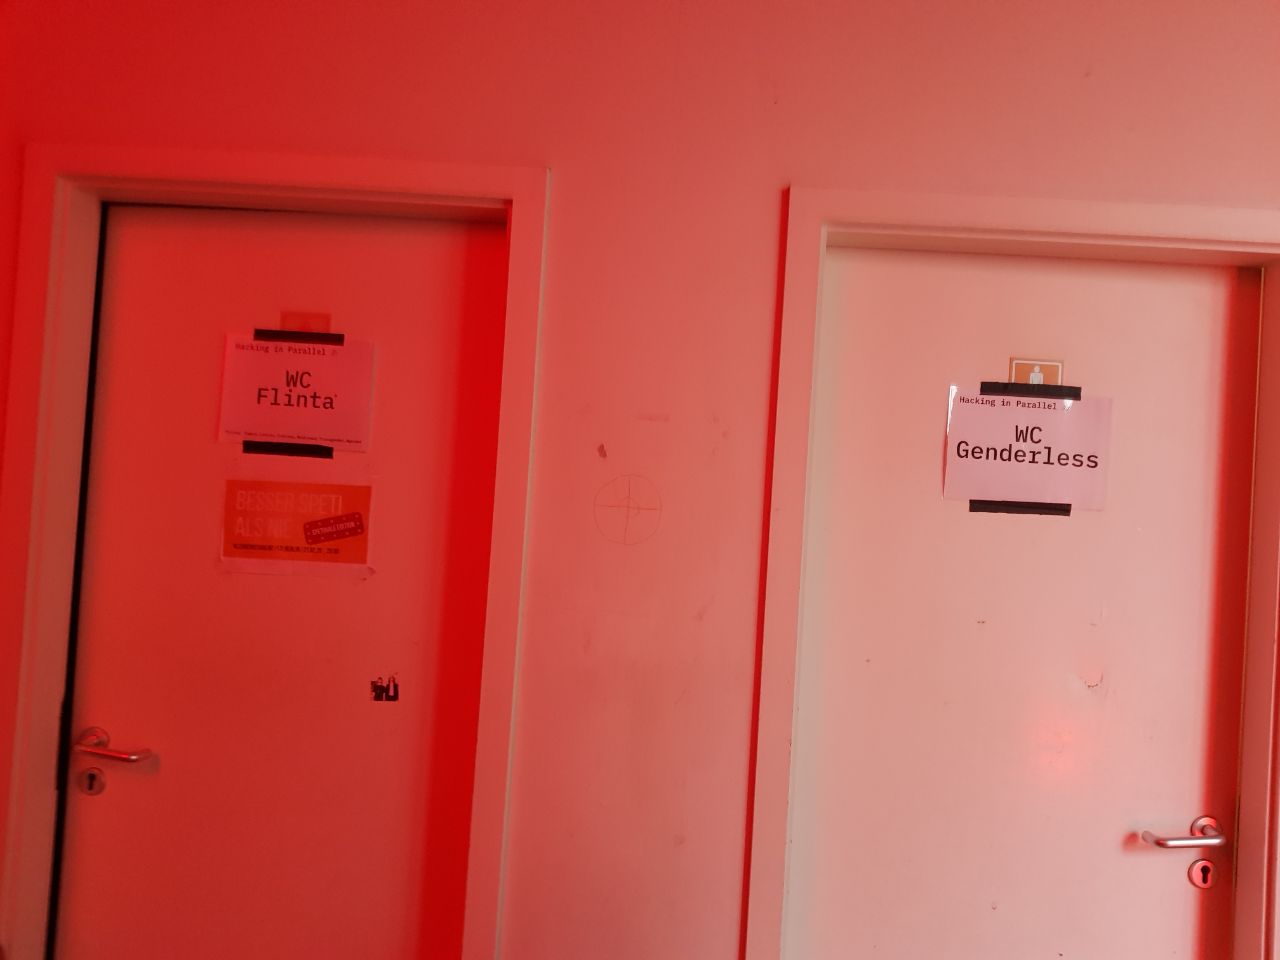 Two toilet doors next to each other, both labeled with pieces of paper hiding the conventional male/female symbols, left piece of paper says "WC FLINTA*", right one says "WC Genderless" (and both peices of paper having printed "Hacking in Parallel" in much smaller letters on top).